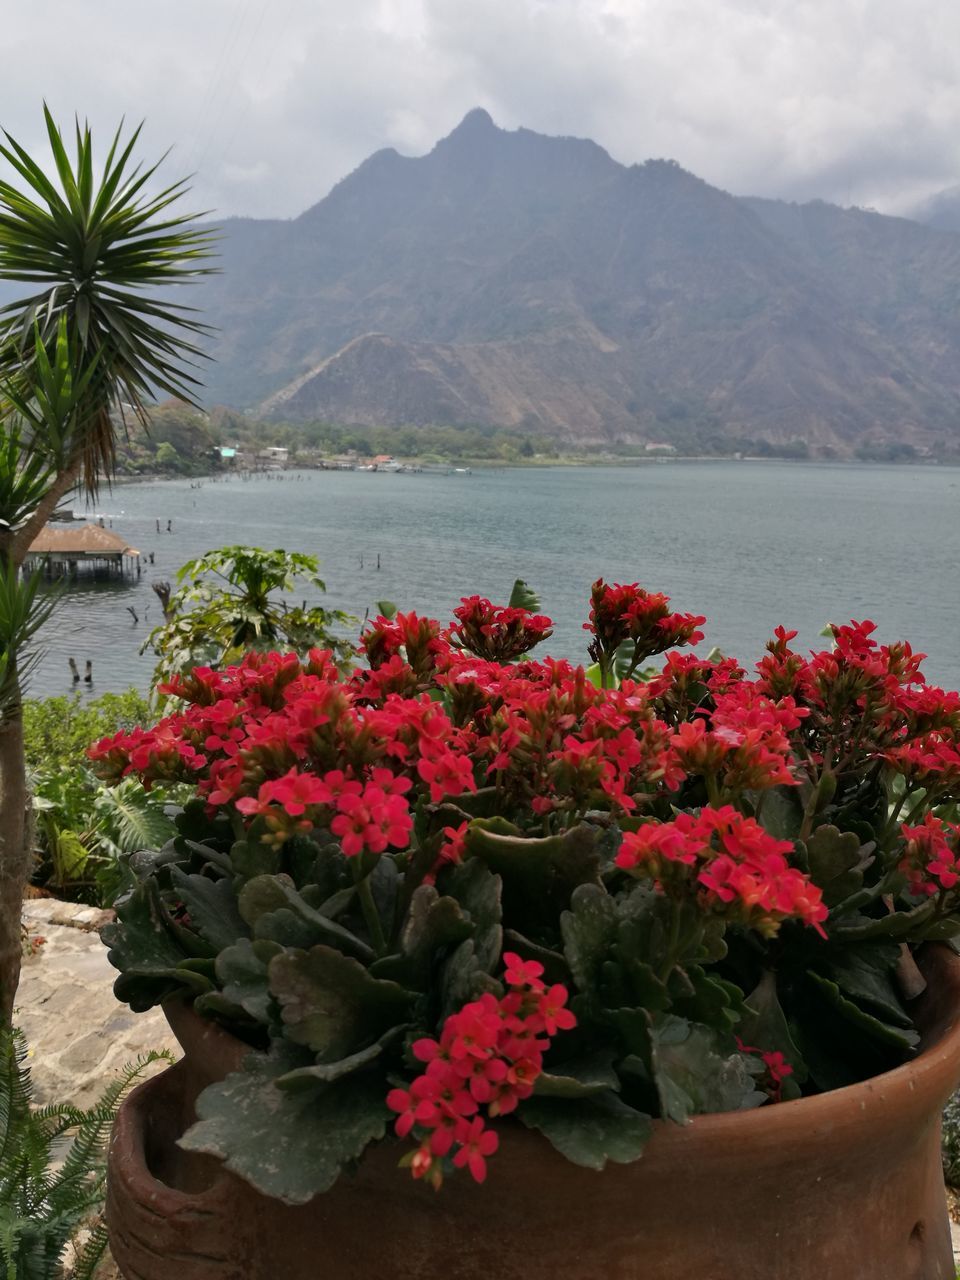 FLOWERING PLANTS BY SEA AGAINST MOUNTAINS AND SKY